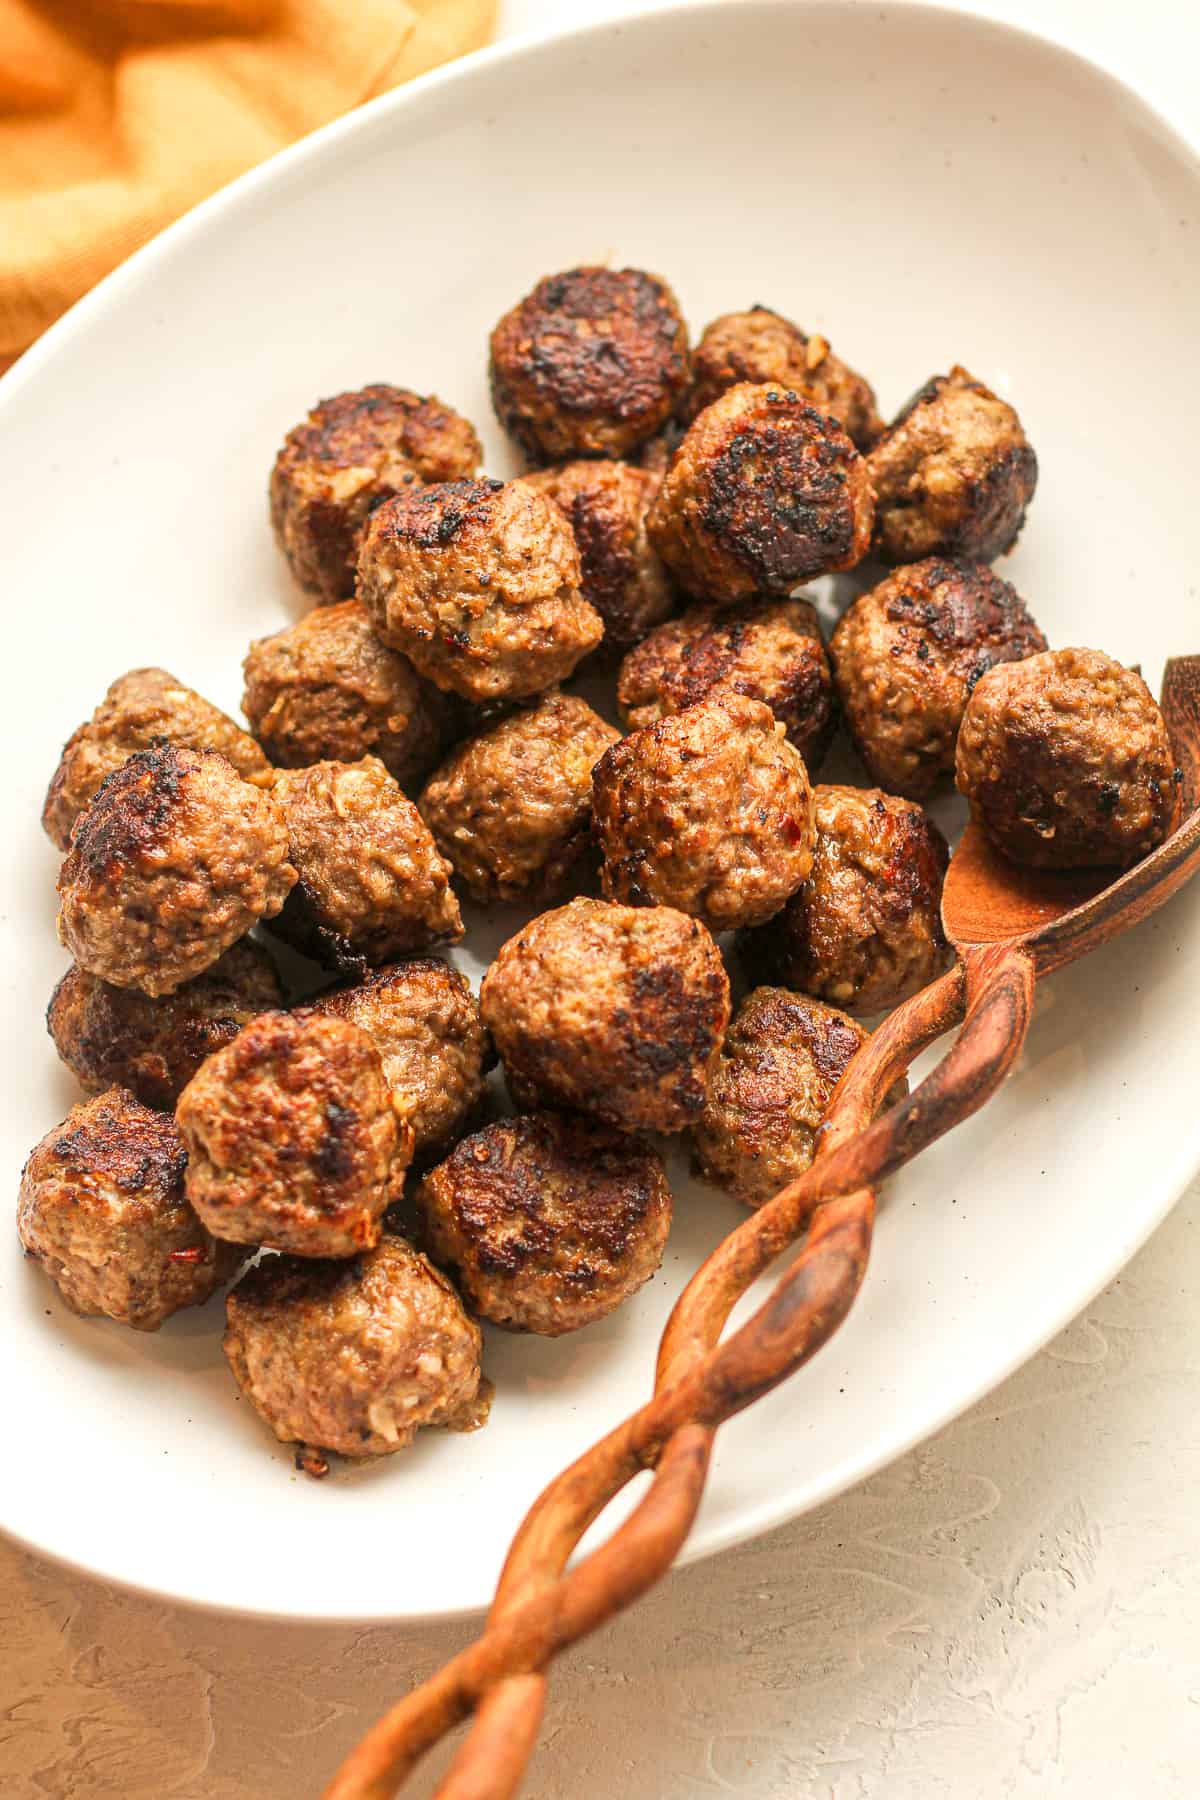 A oval platter of just cooked pork and beef meatballs.